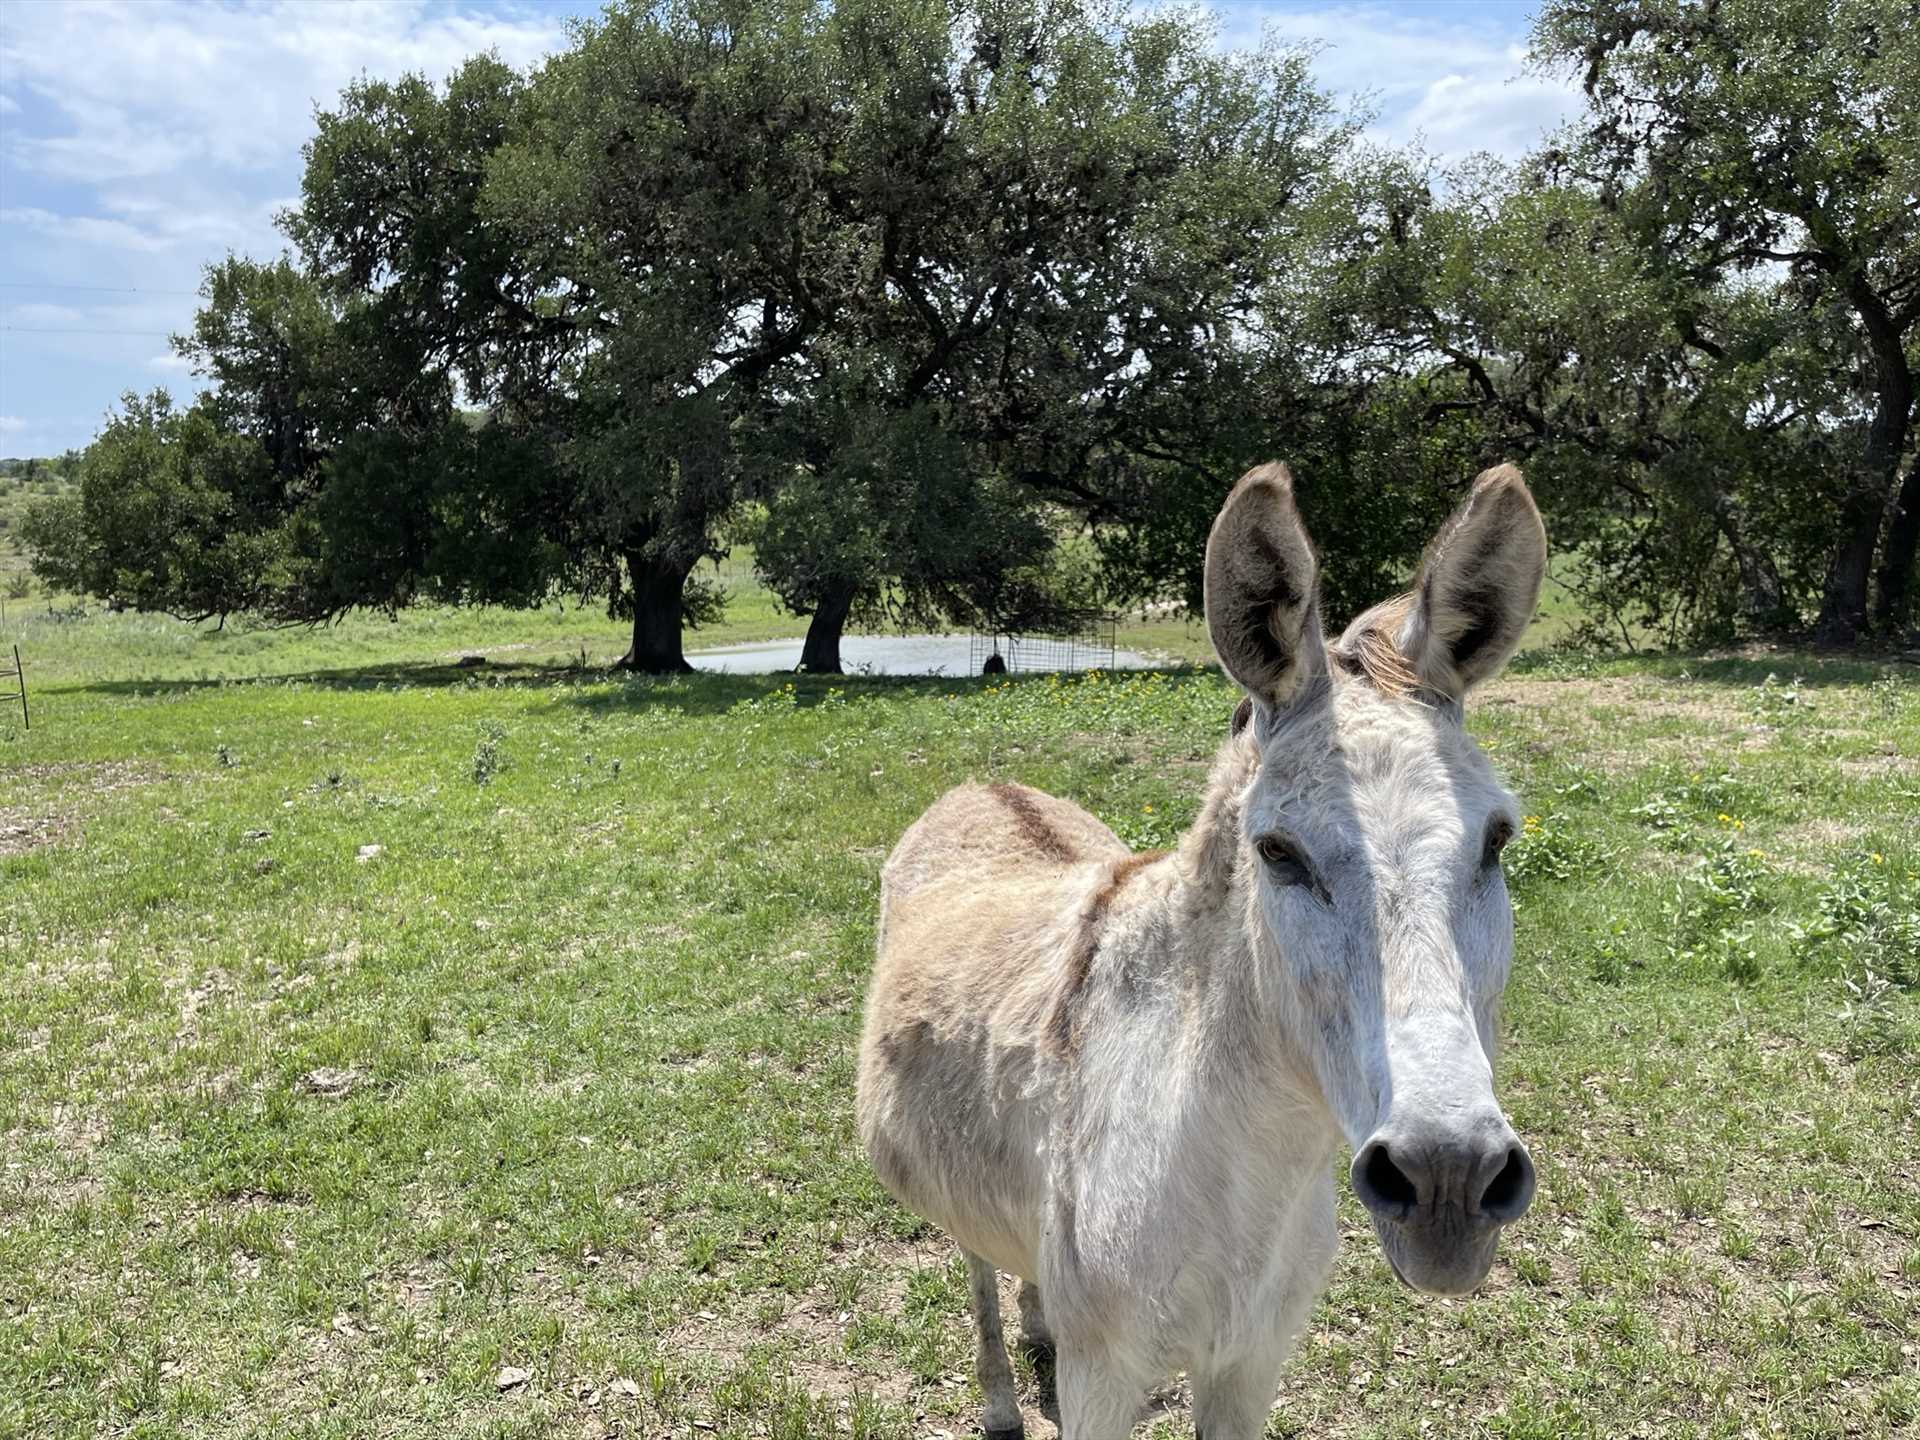                                                 This is your official greeter, Charlie the donkey. The hosts don't have the heart to tell him he isn't in charge!